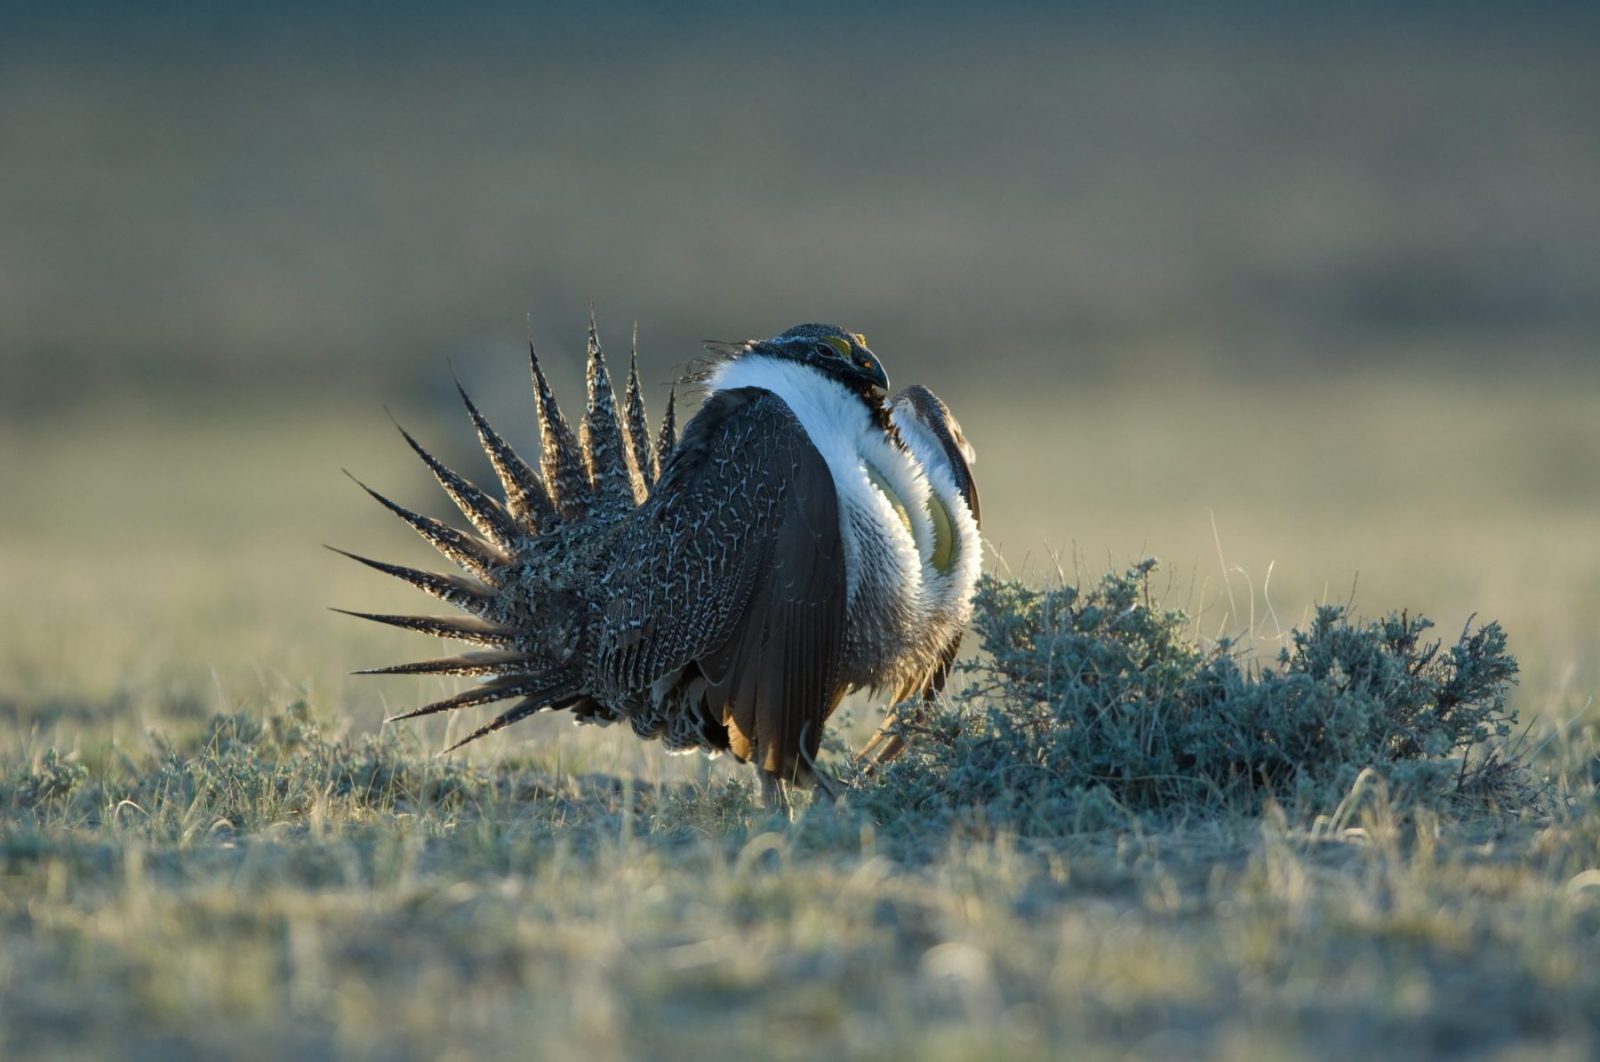 Keep up the pressure to save our sagebrush